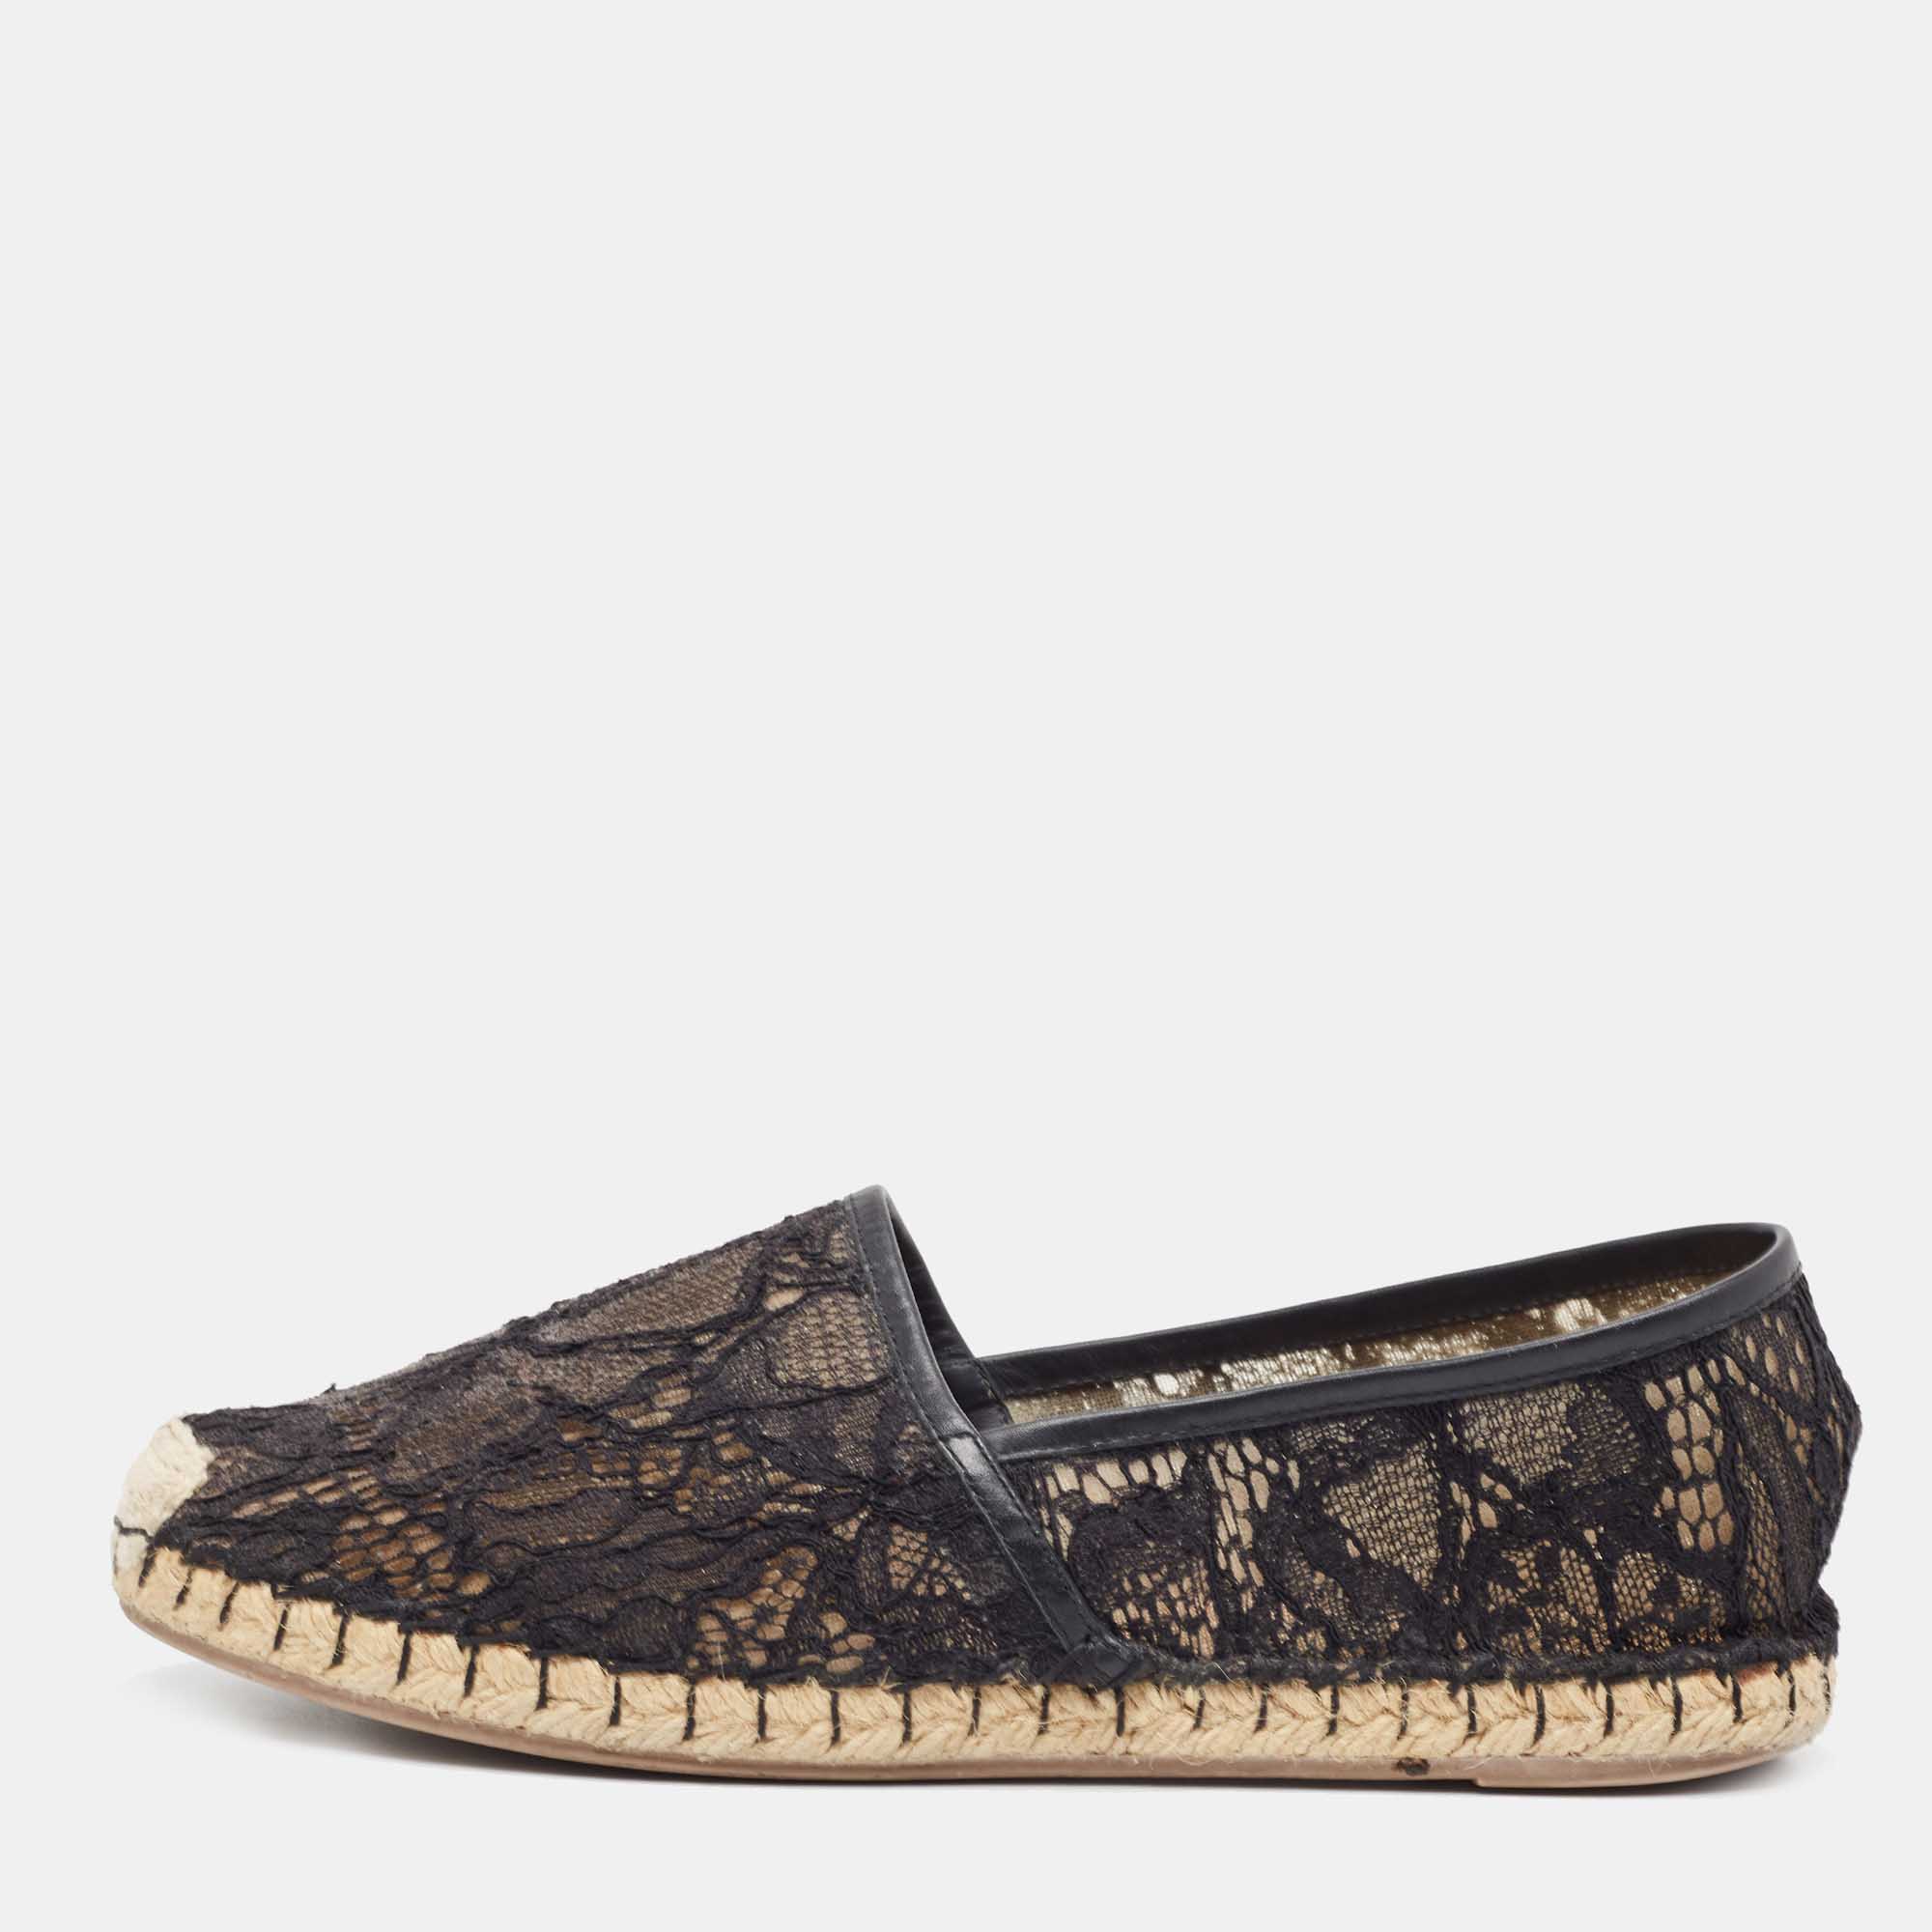 Pre-owned Valentino Garavani Black Lace And Leather Butterfly Espadrille Flats Size 38